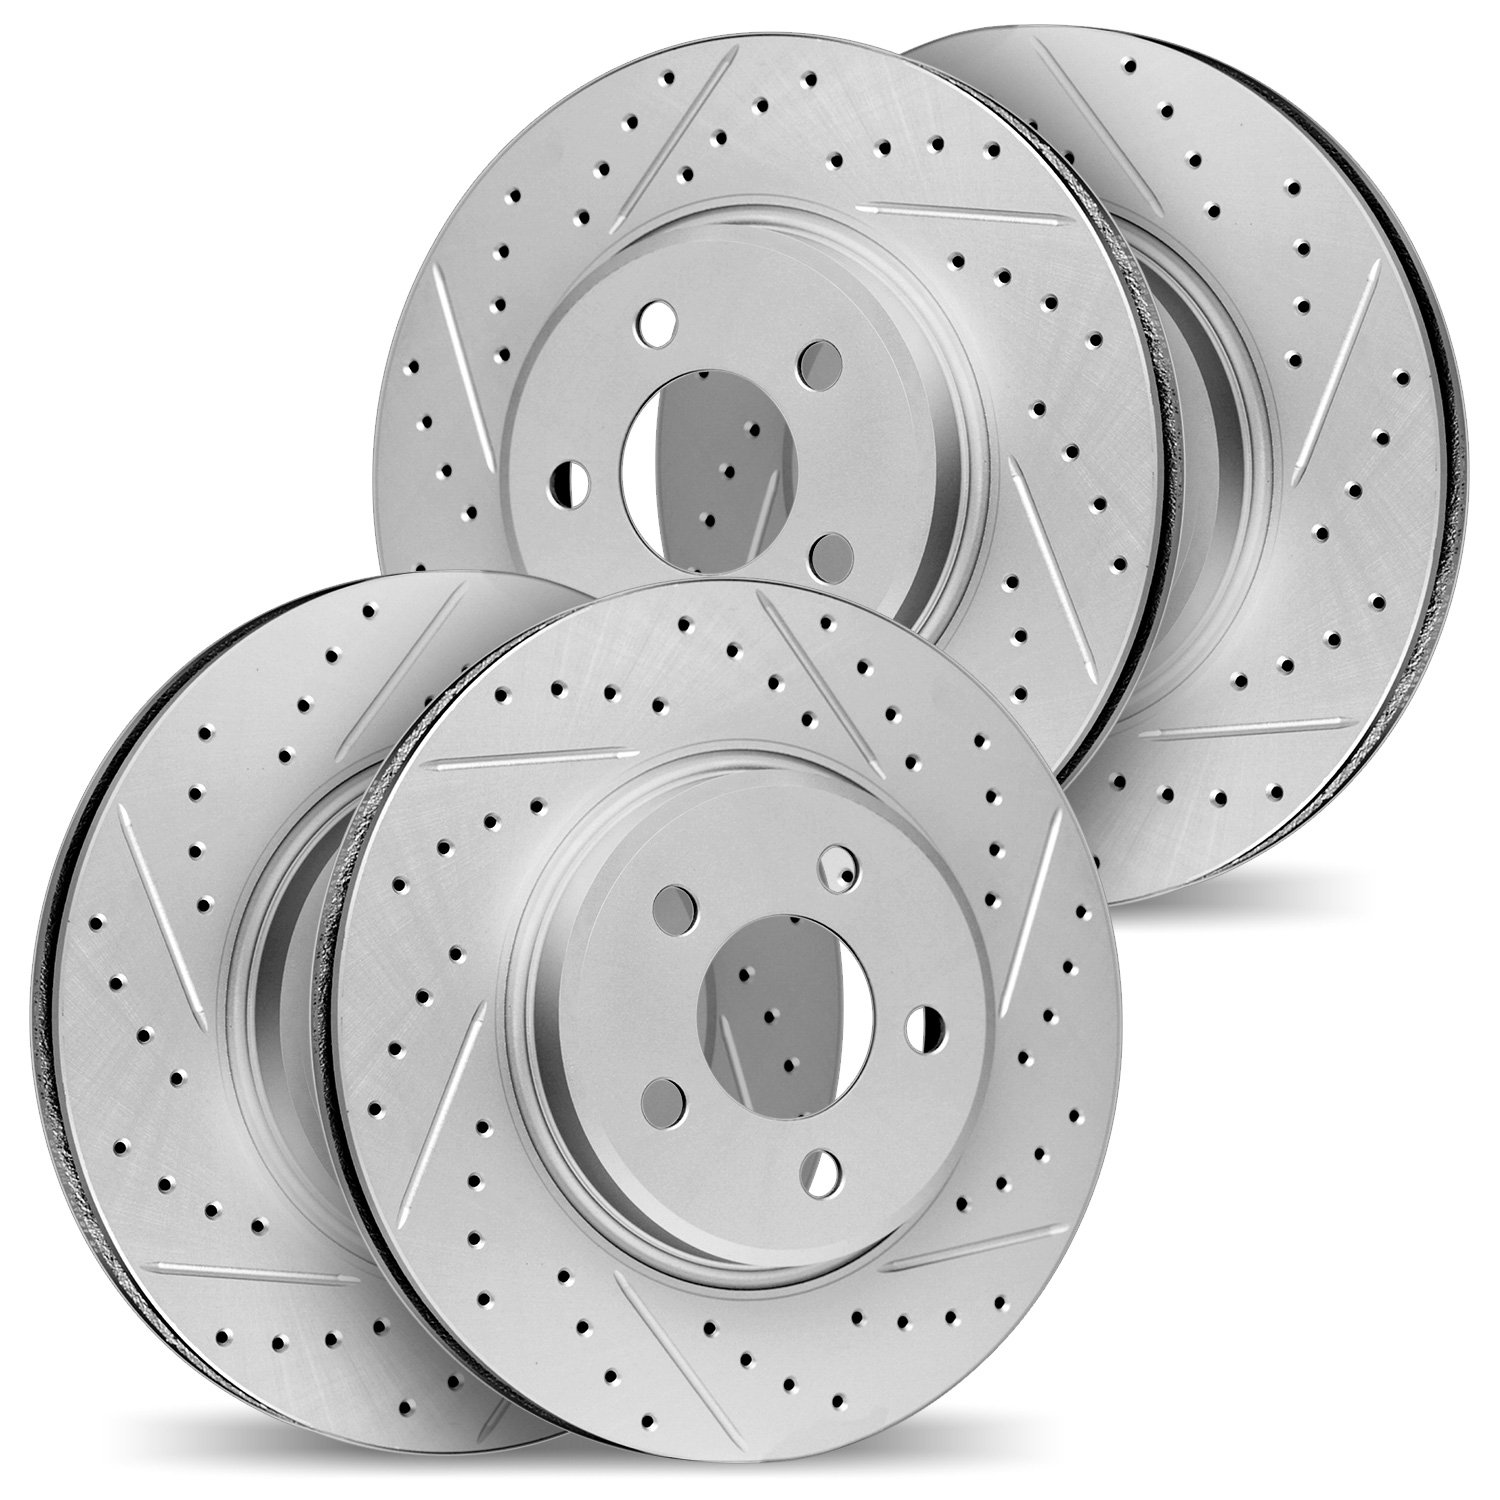 2004-46026 Geoperformance Drilled/Slotted Brake Rotors, Fits Select GM, Position: Front and Rear